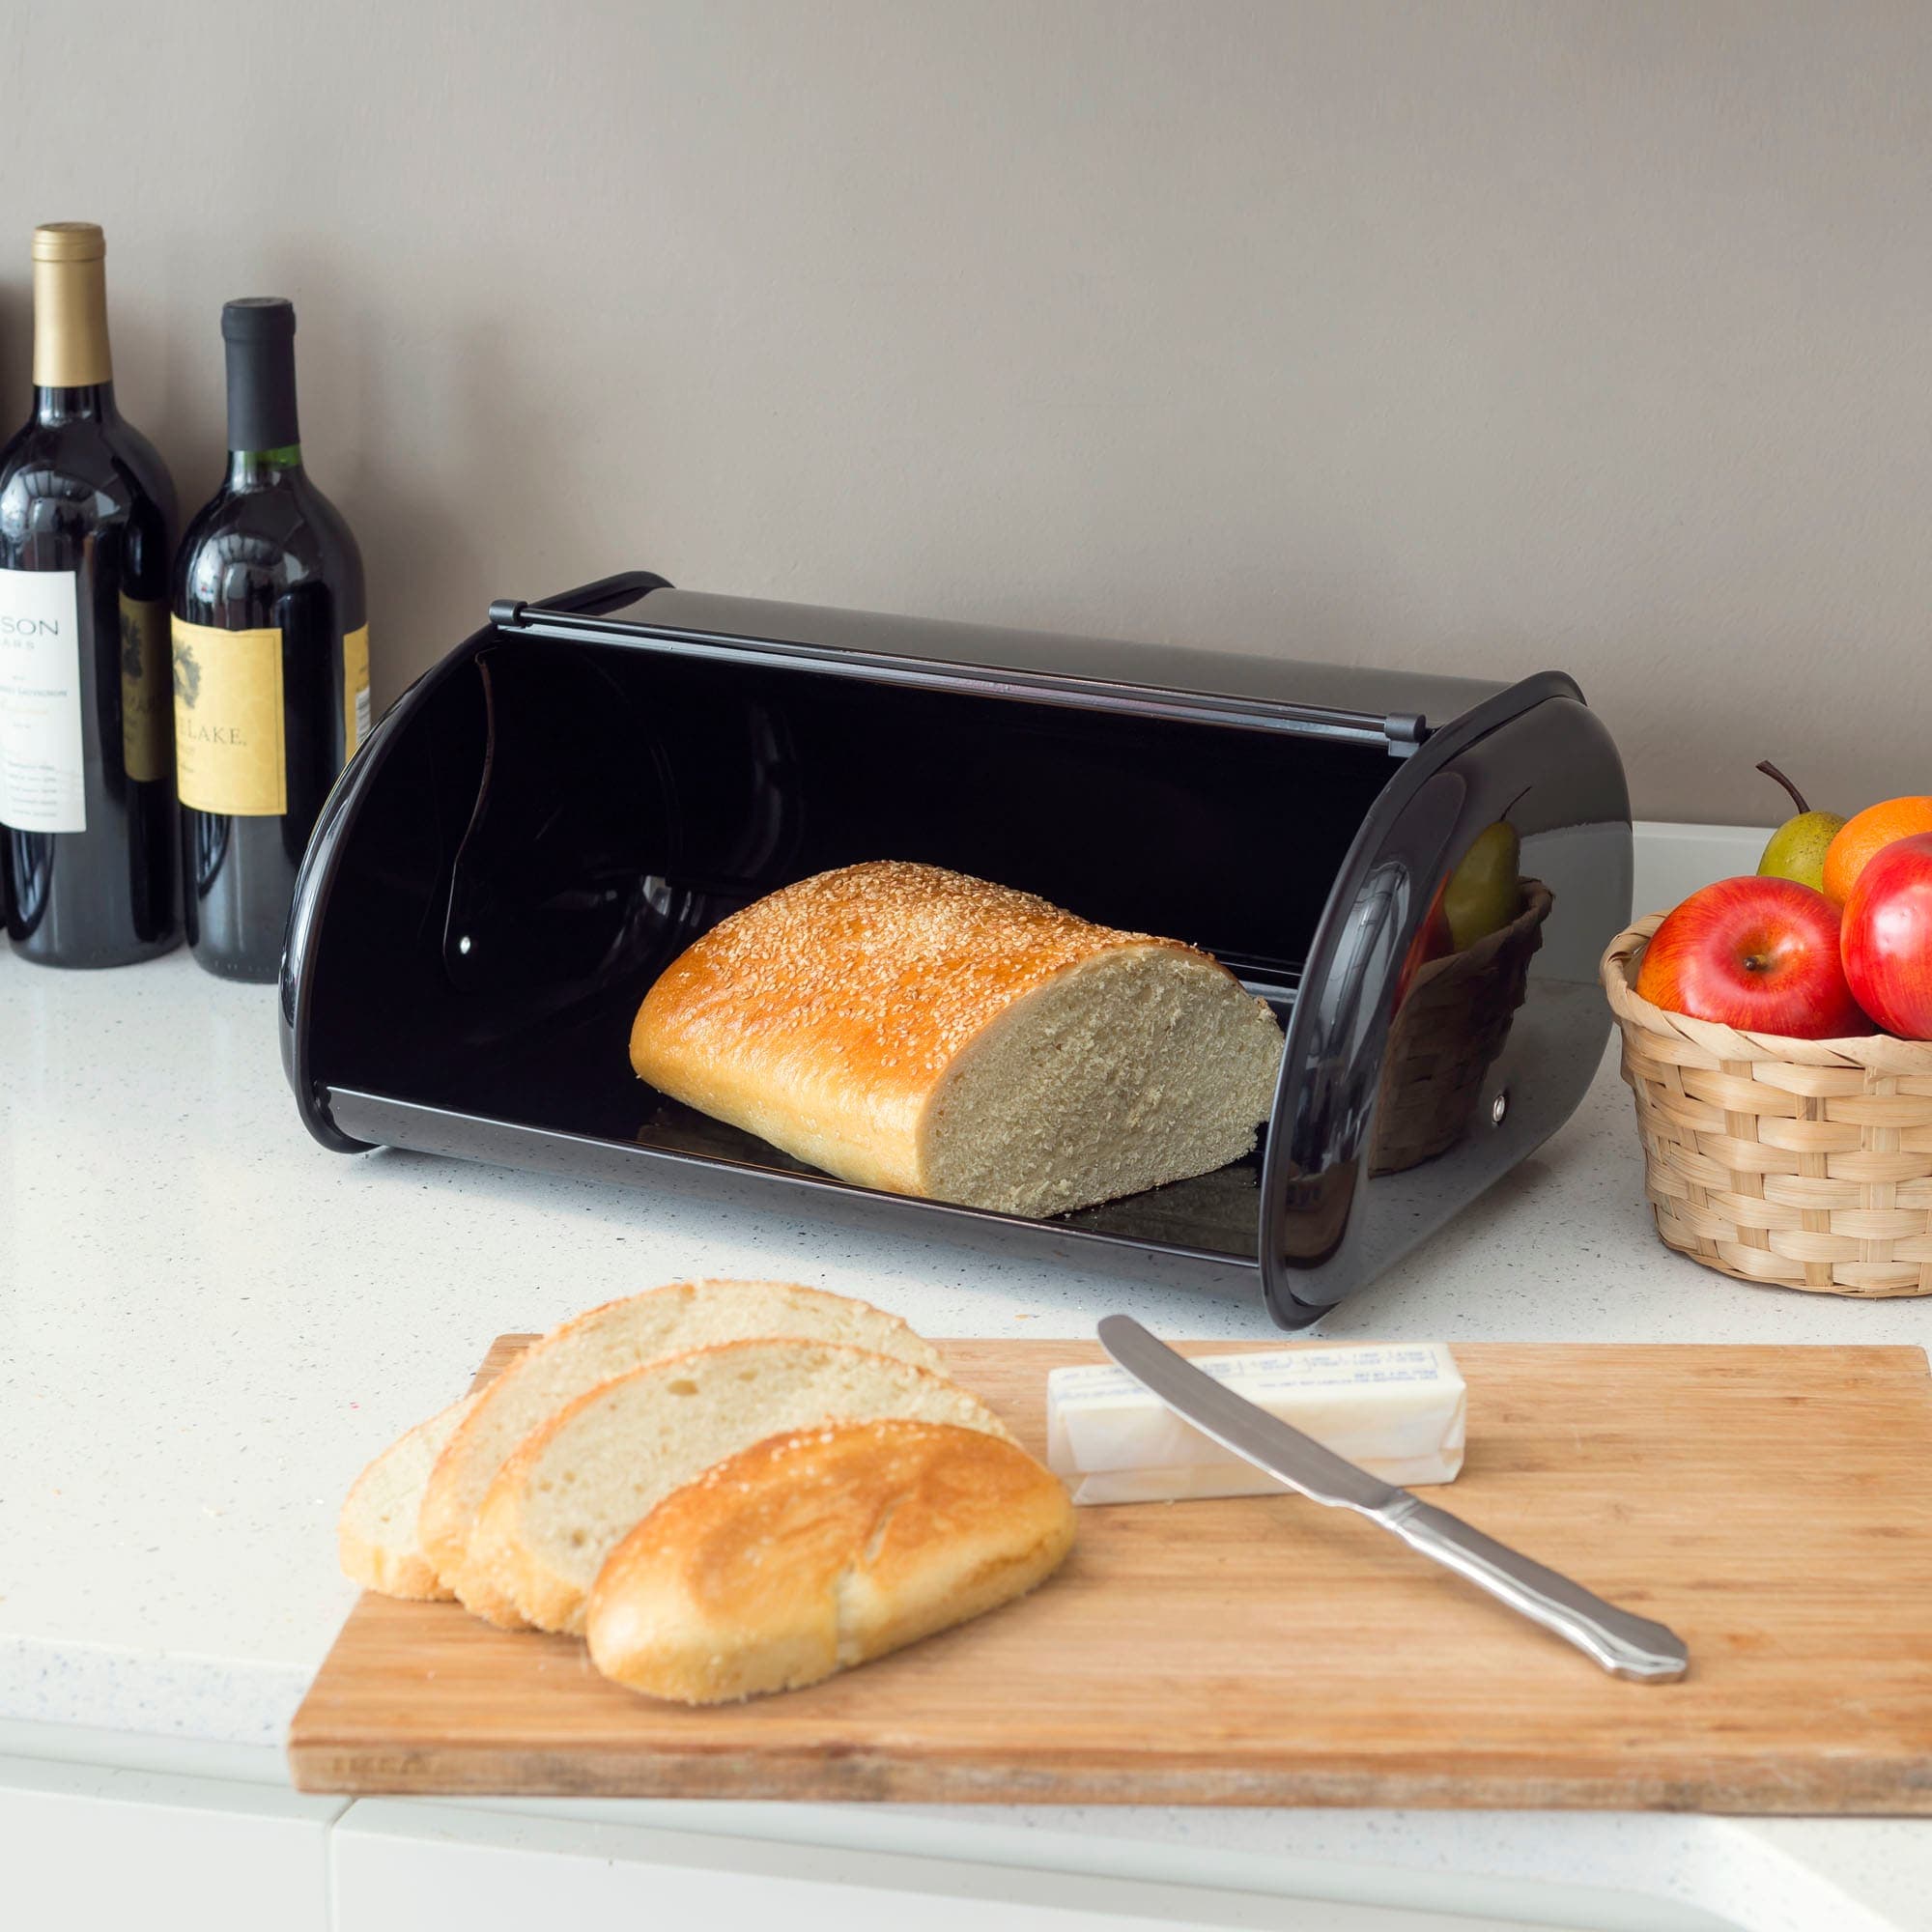 Home Basics Roll Up Lid Metal Bread Box, Black $20.00 EACH, CASE PACK OF 6